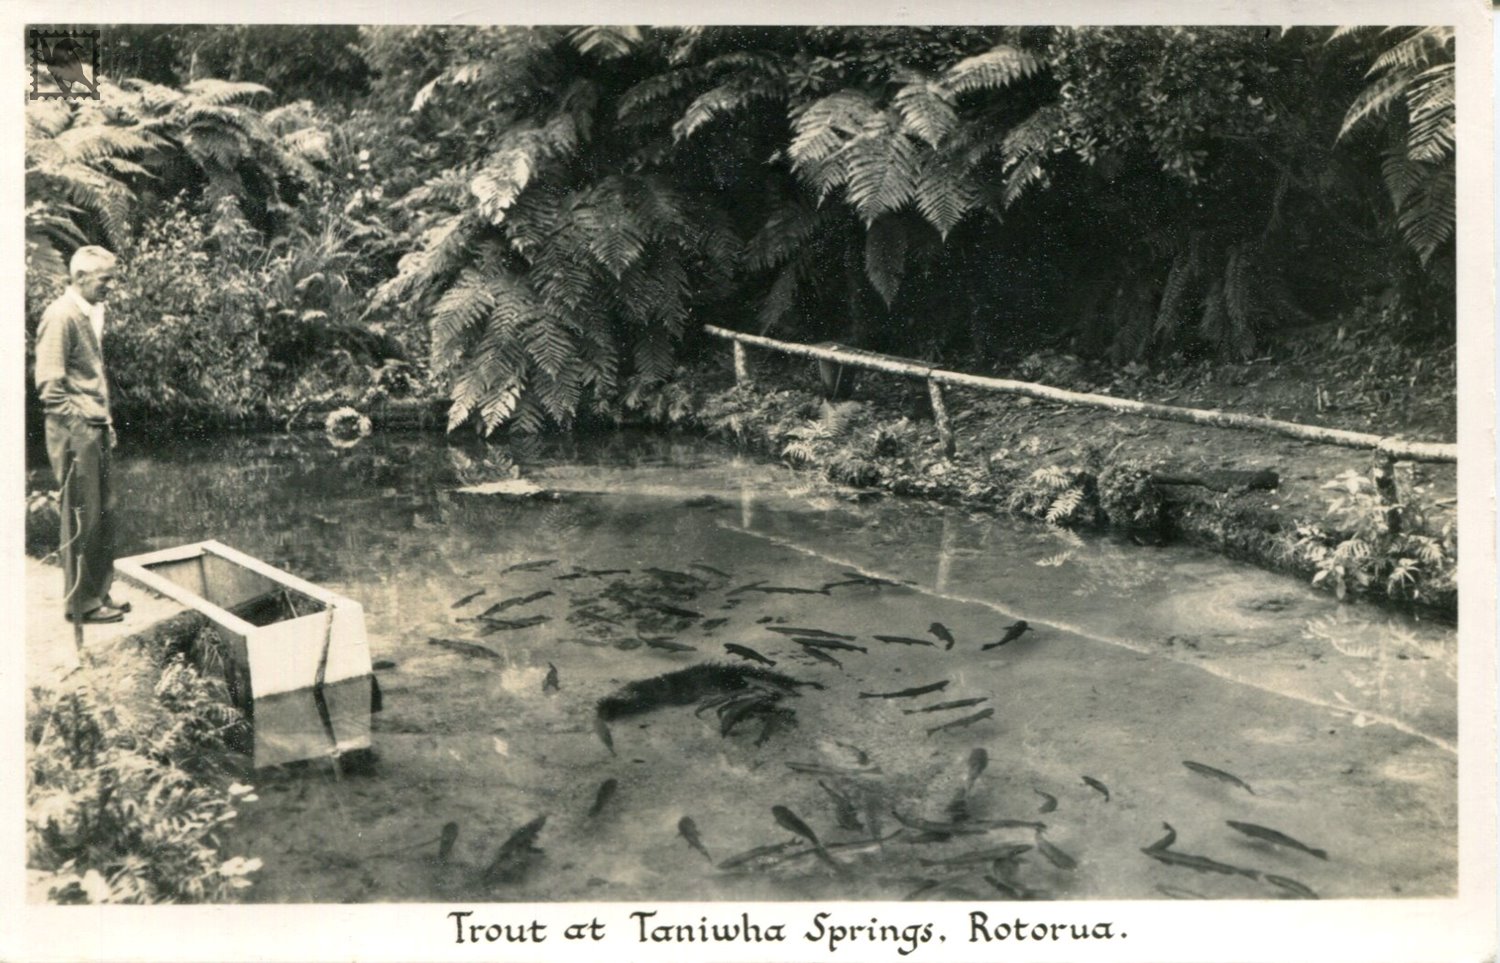 Trout at Taniwha Springs